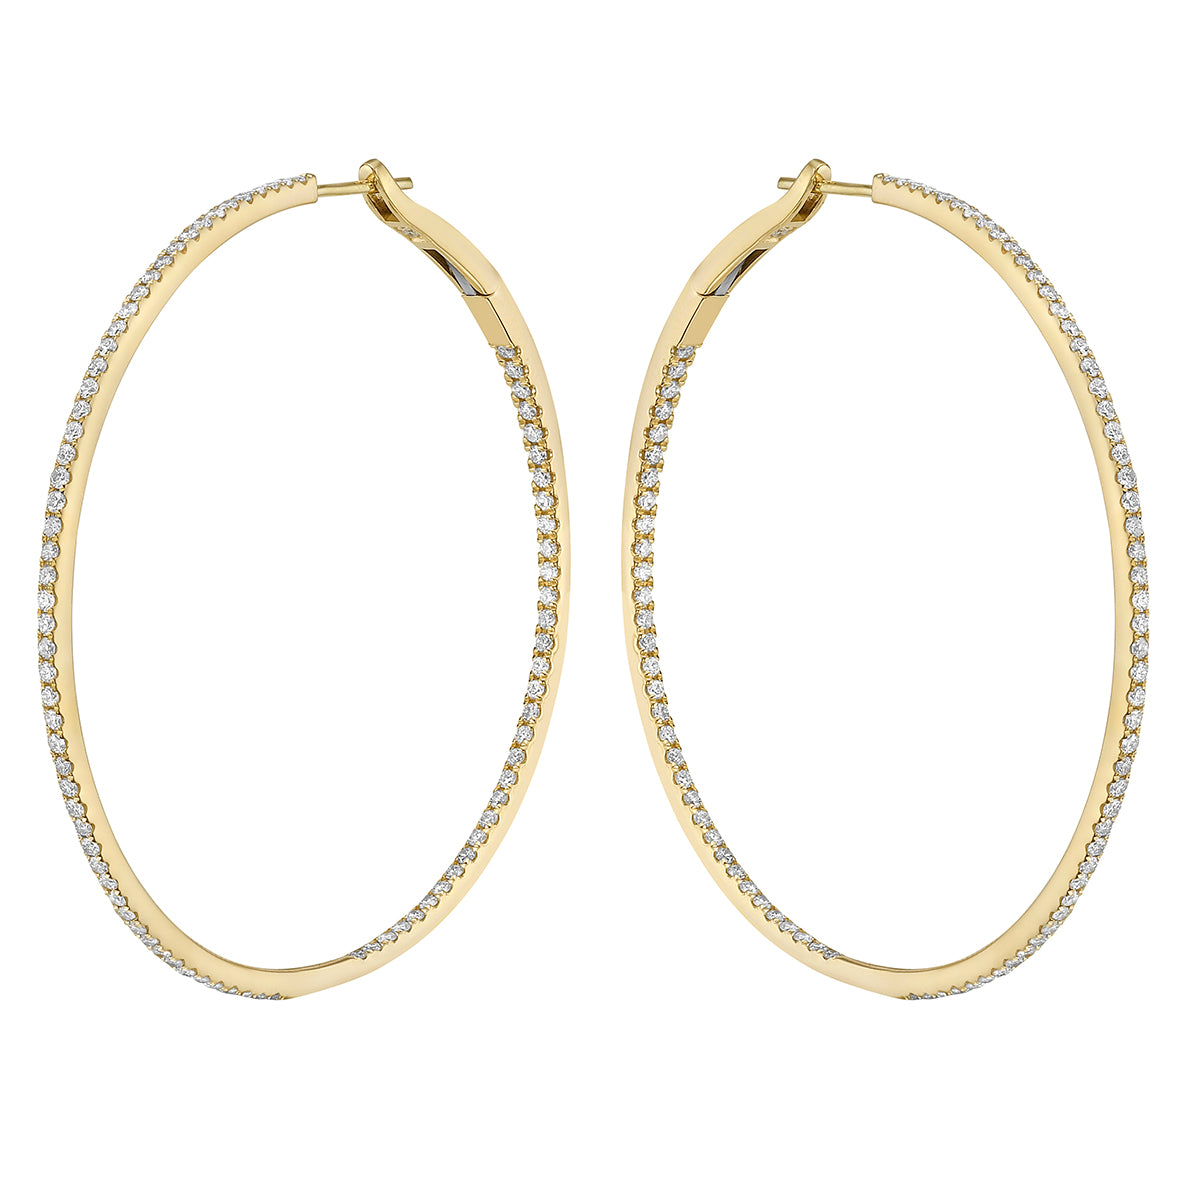 2.0 in Yellow Gold Inside and Out Diamond Hoop Earrings